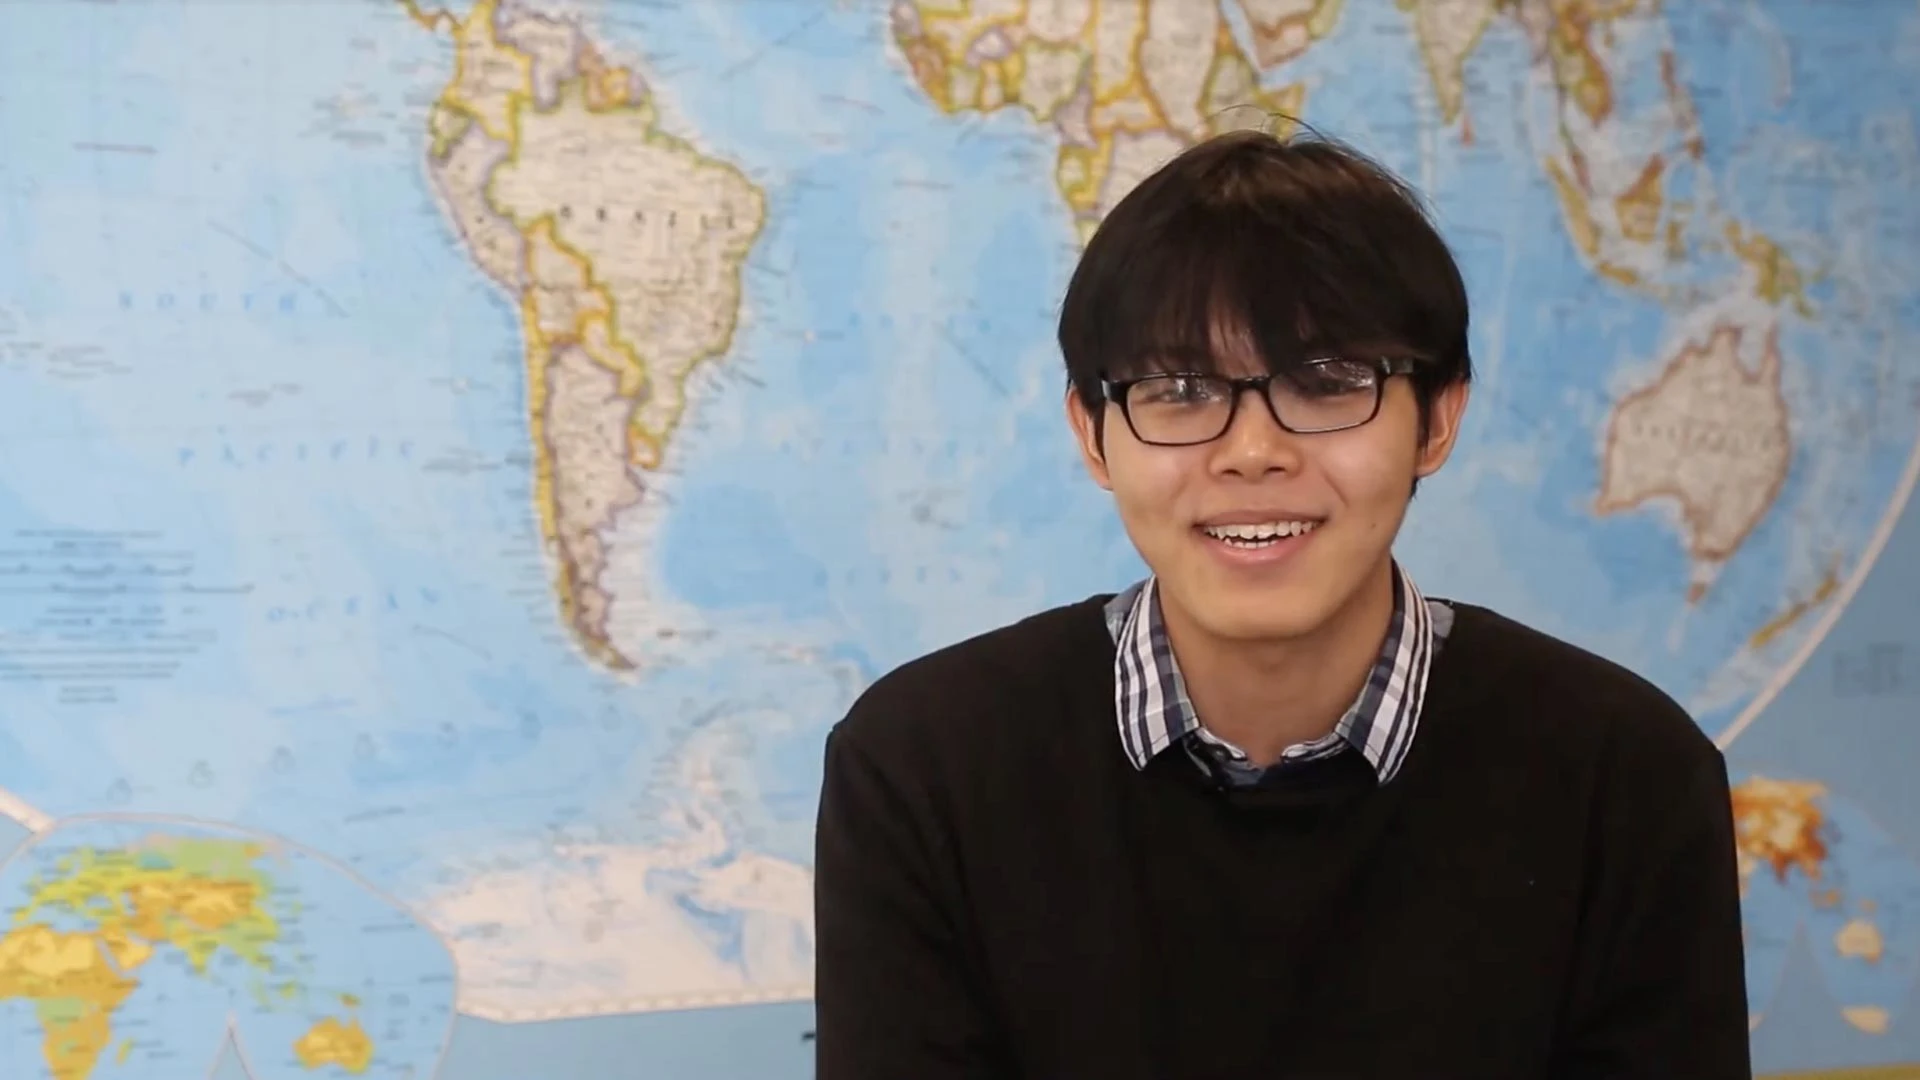 Student smiling and sitting in front of world map.